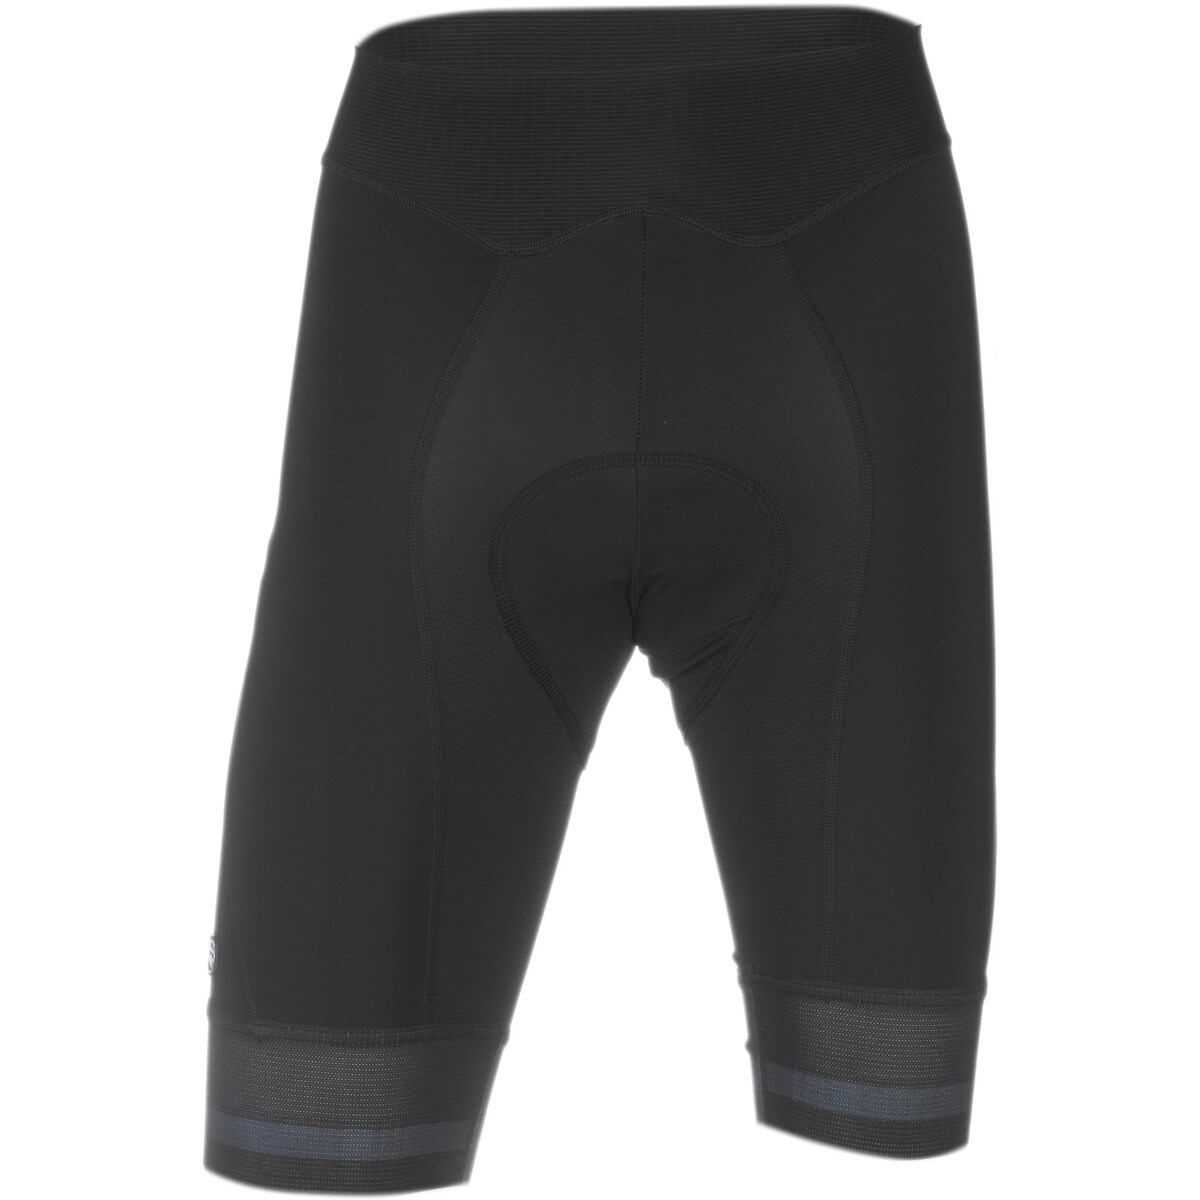 Giordana FormaRed Carbon Shorts with Cirro Insert Men's